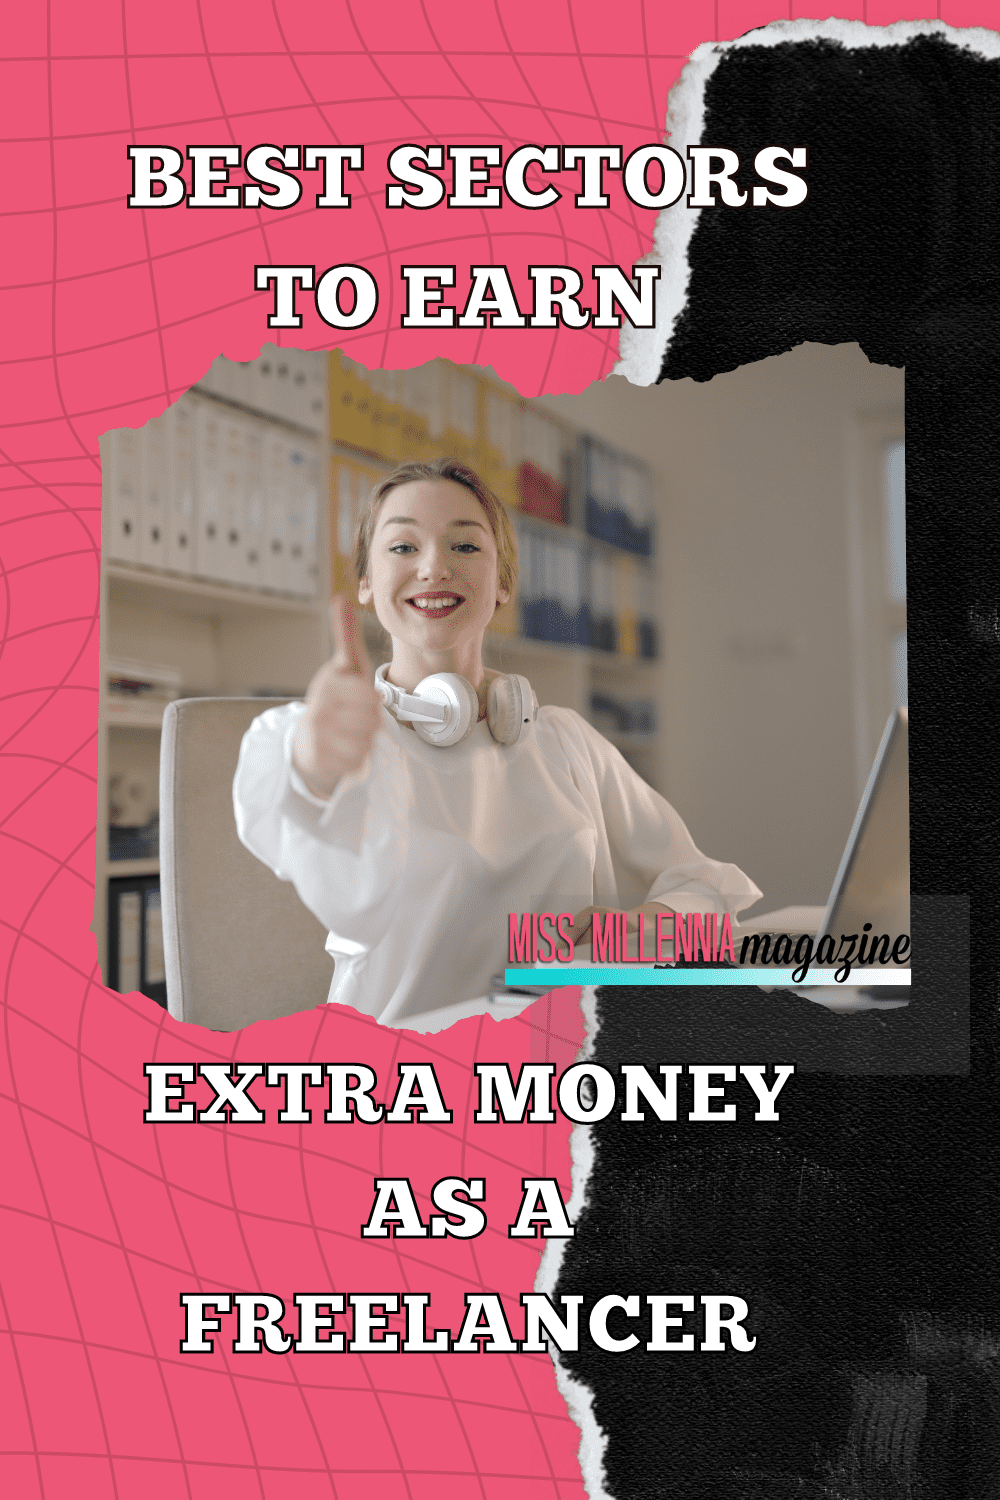 Best Sectors to Earn Extra Money as a Freelancer